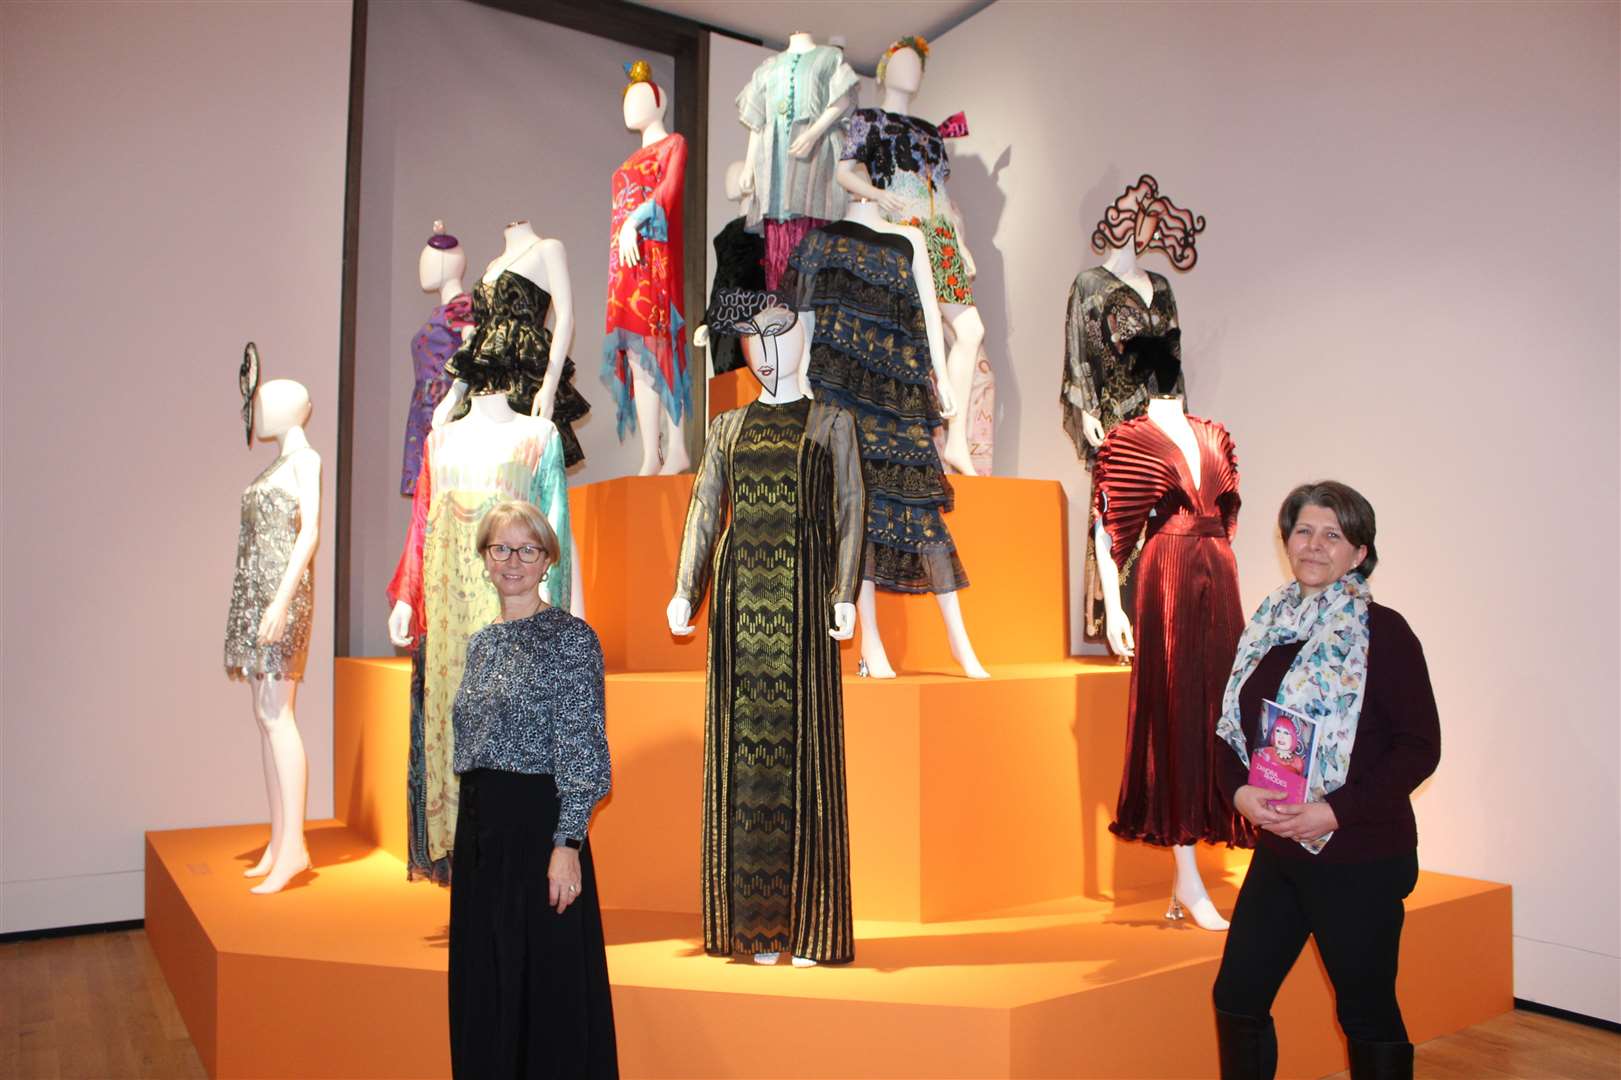 Collections and conservation officer with the Fashion and Textile Museum in London Gill Cochrane (left) and councillor Marie Boulton at the Zandra Rhodes exhibition.